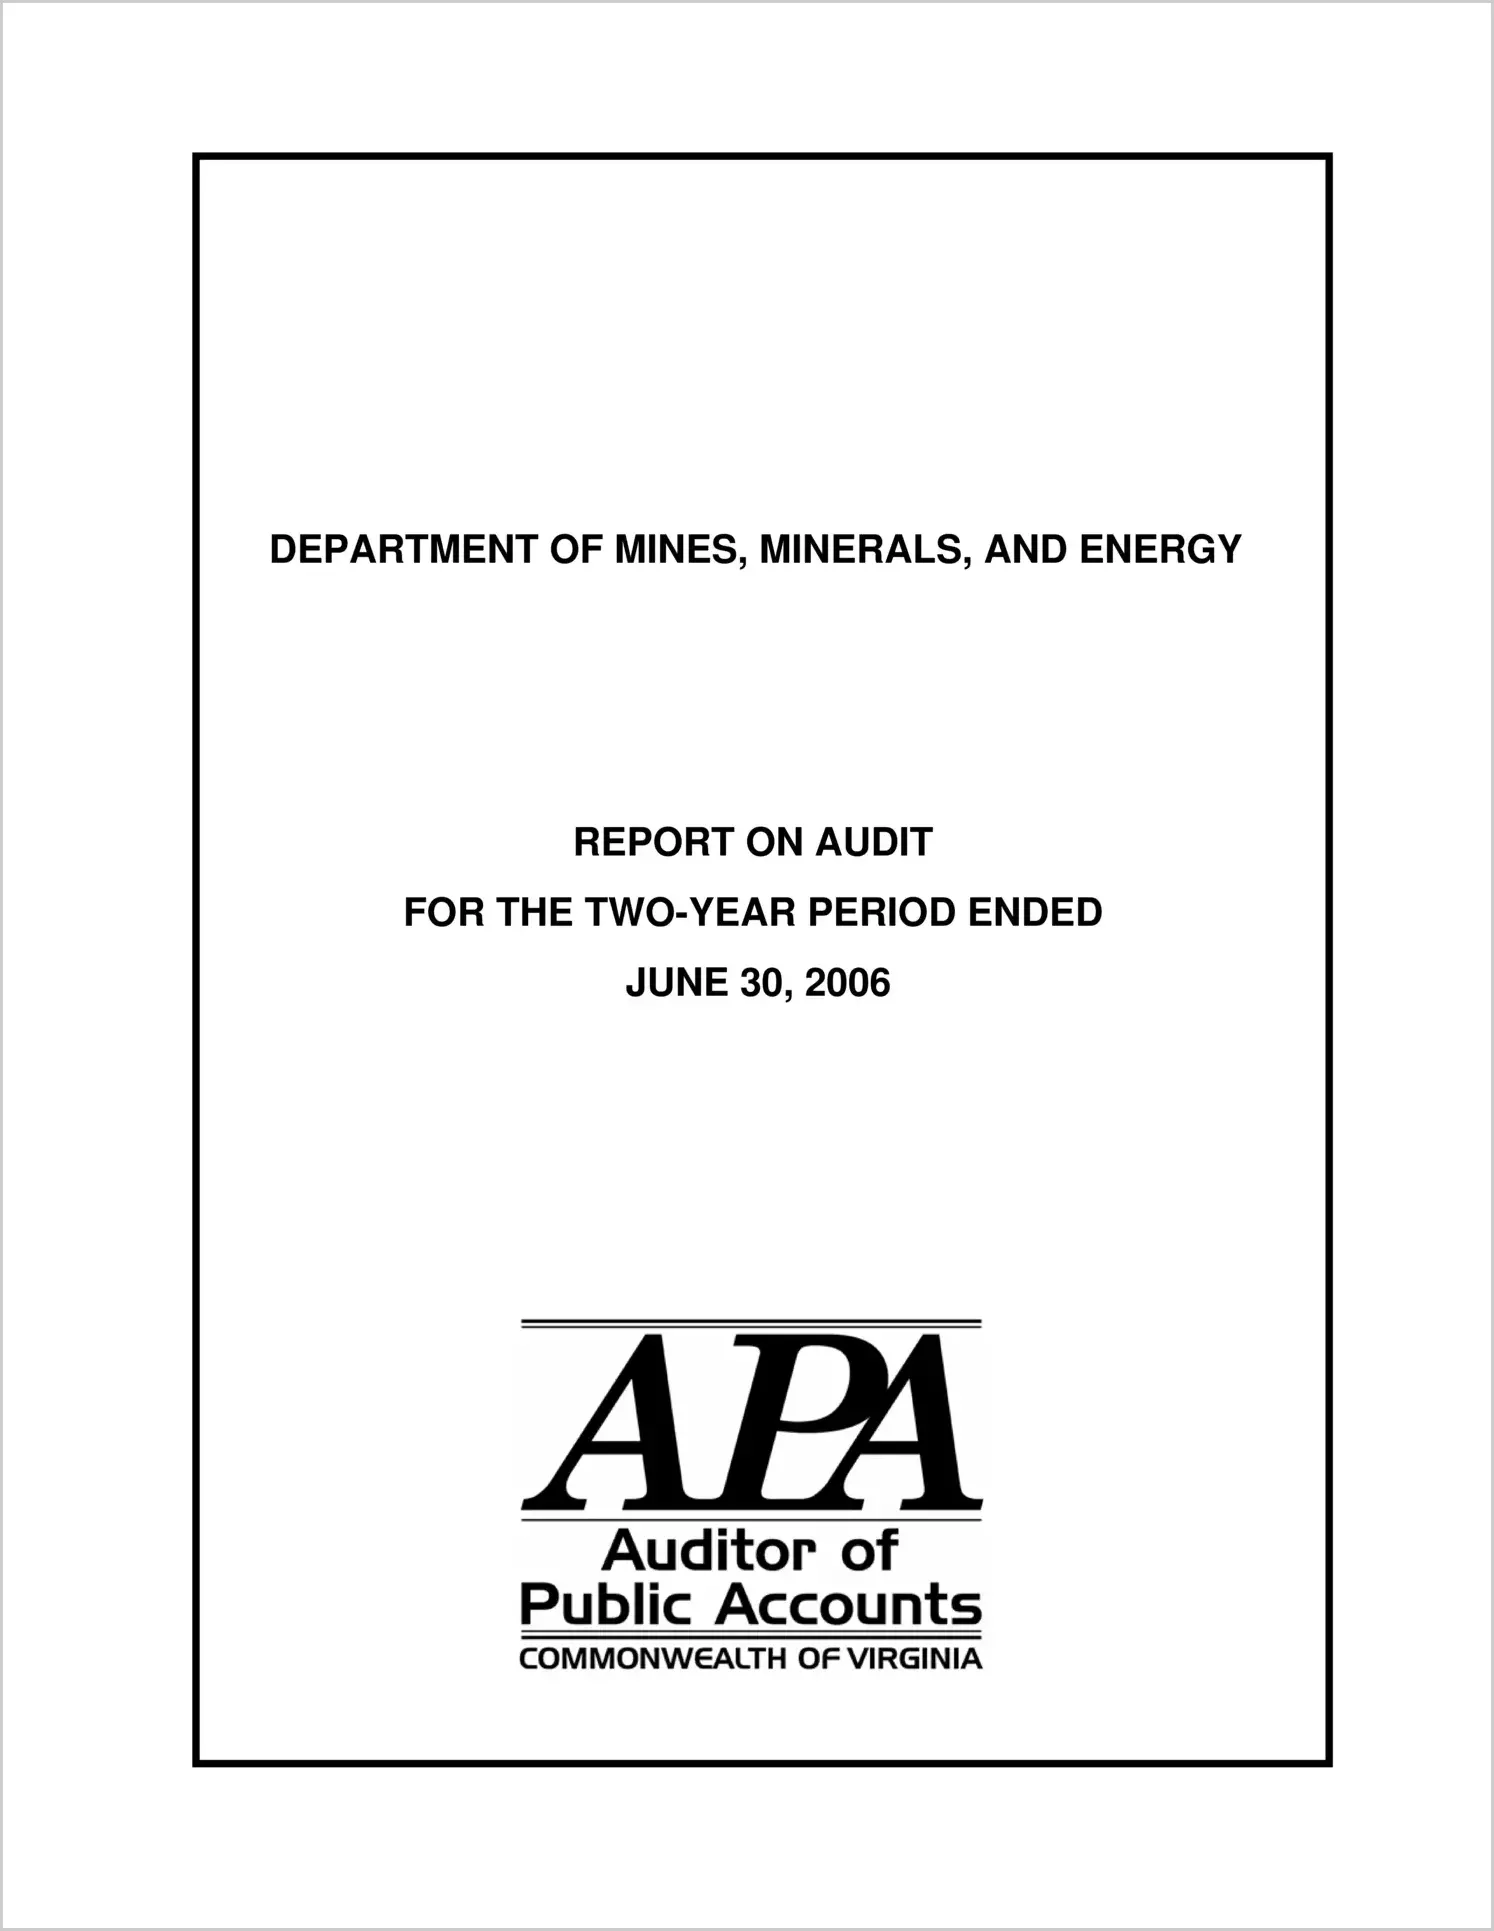 Department of Mines, Minerals, and Energy for the two-year period ended June 30, 2006